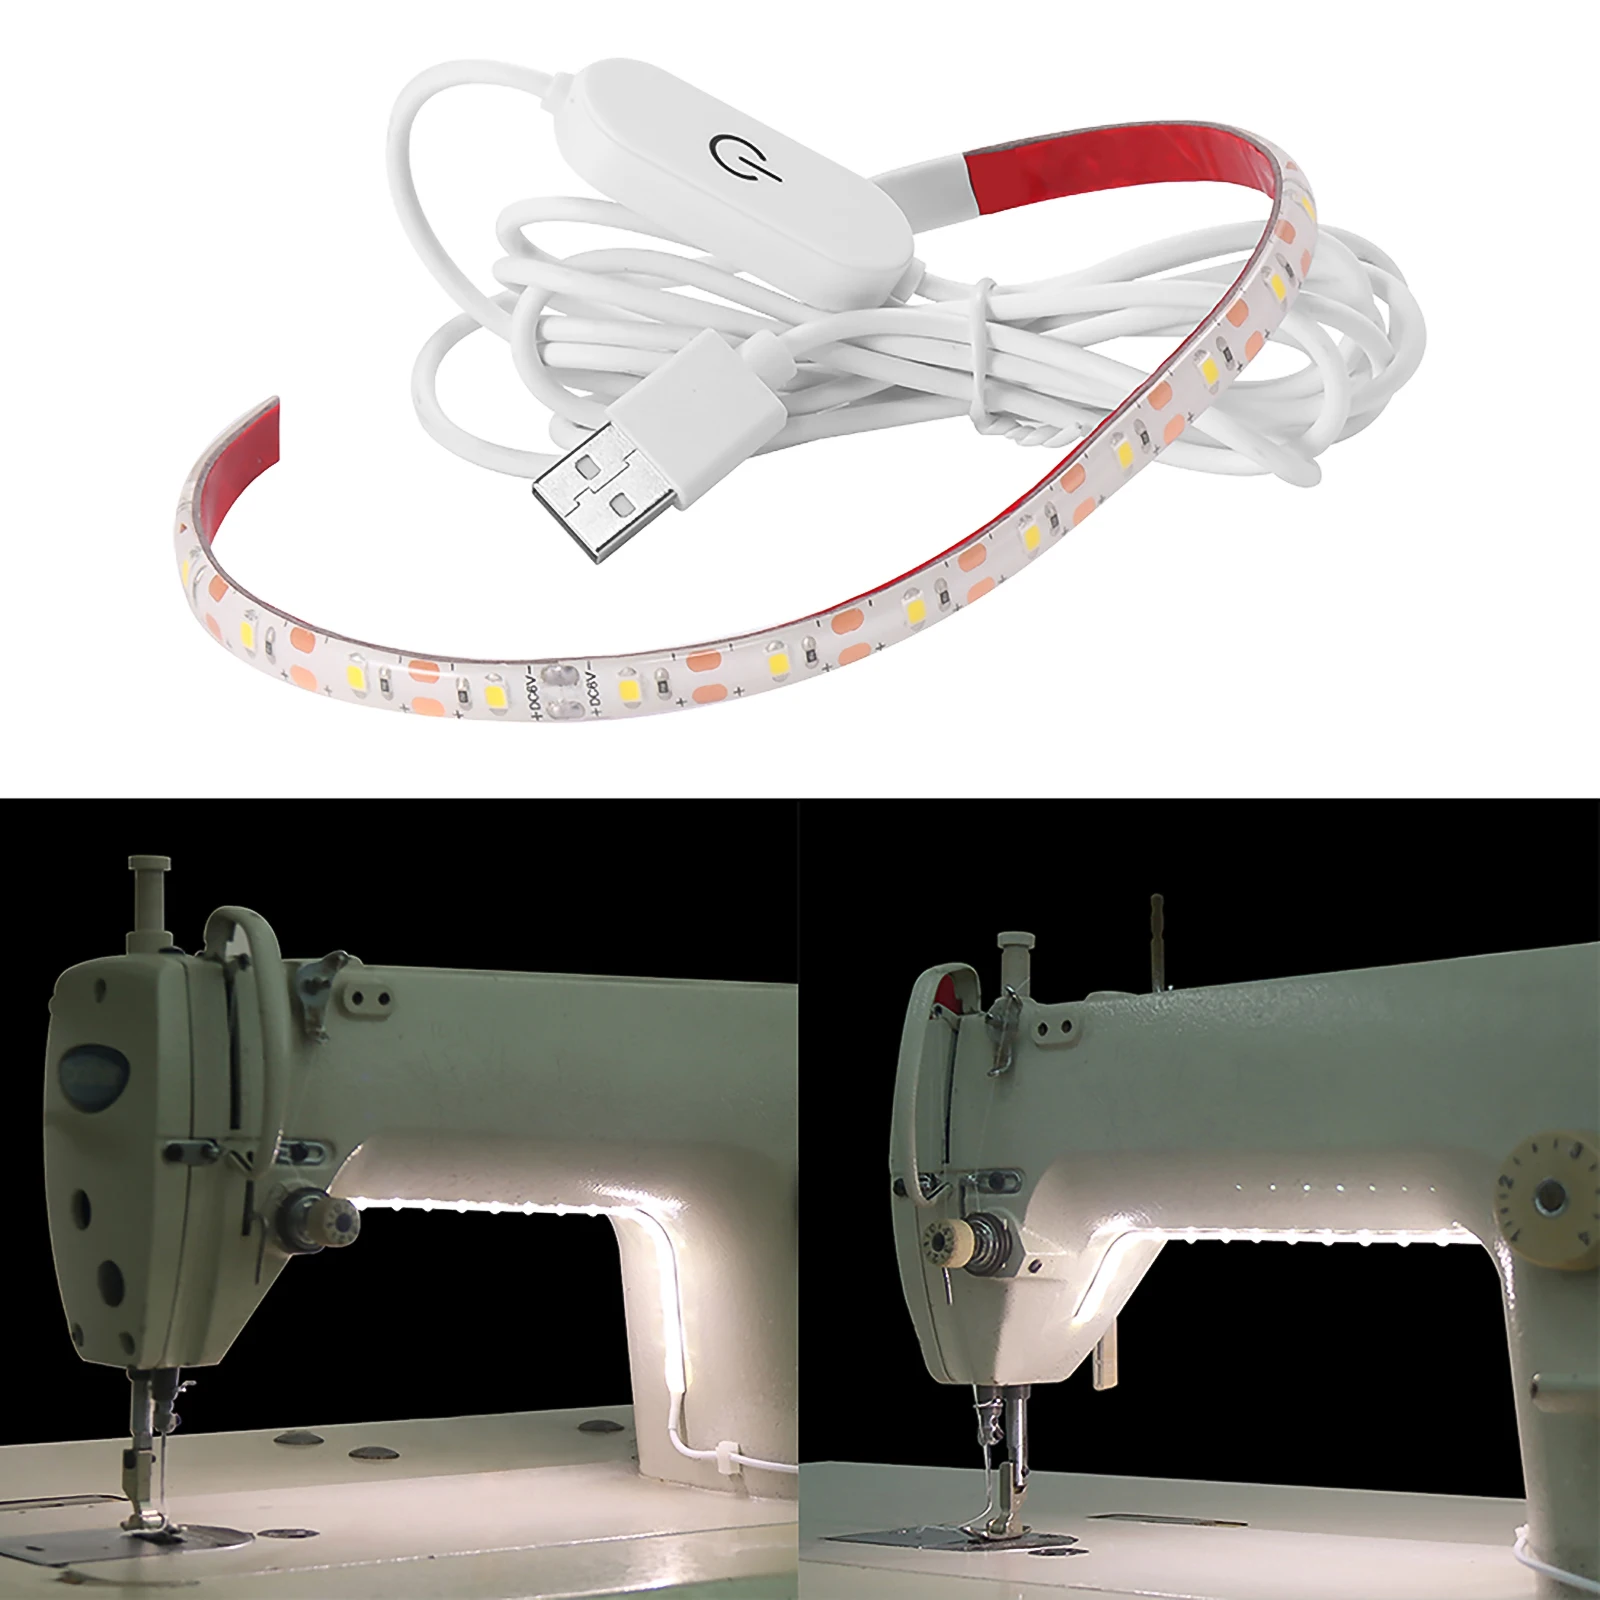 

30cm LED Sewing Machine Light Strip Kit SMD 2835 White USB Powered With Touch Switch Lighting Strips For Desktop Cabinet Kitchen